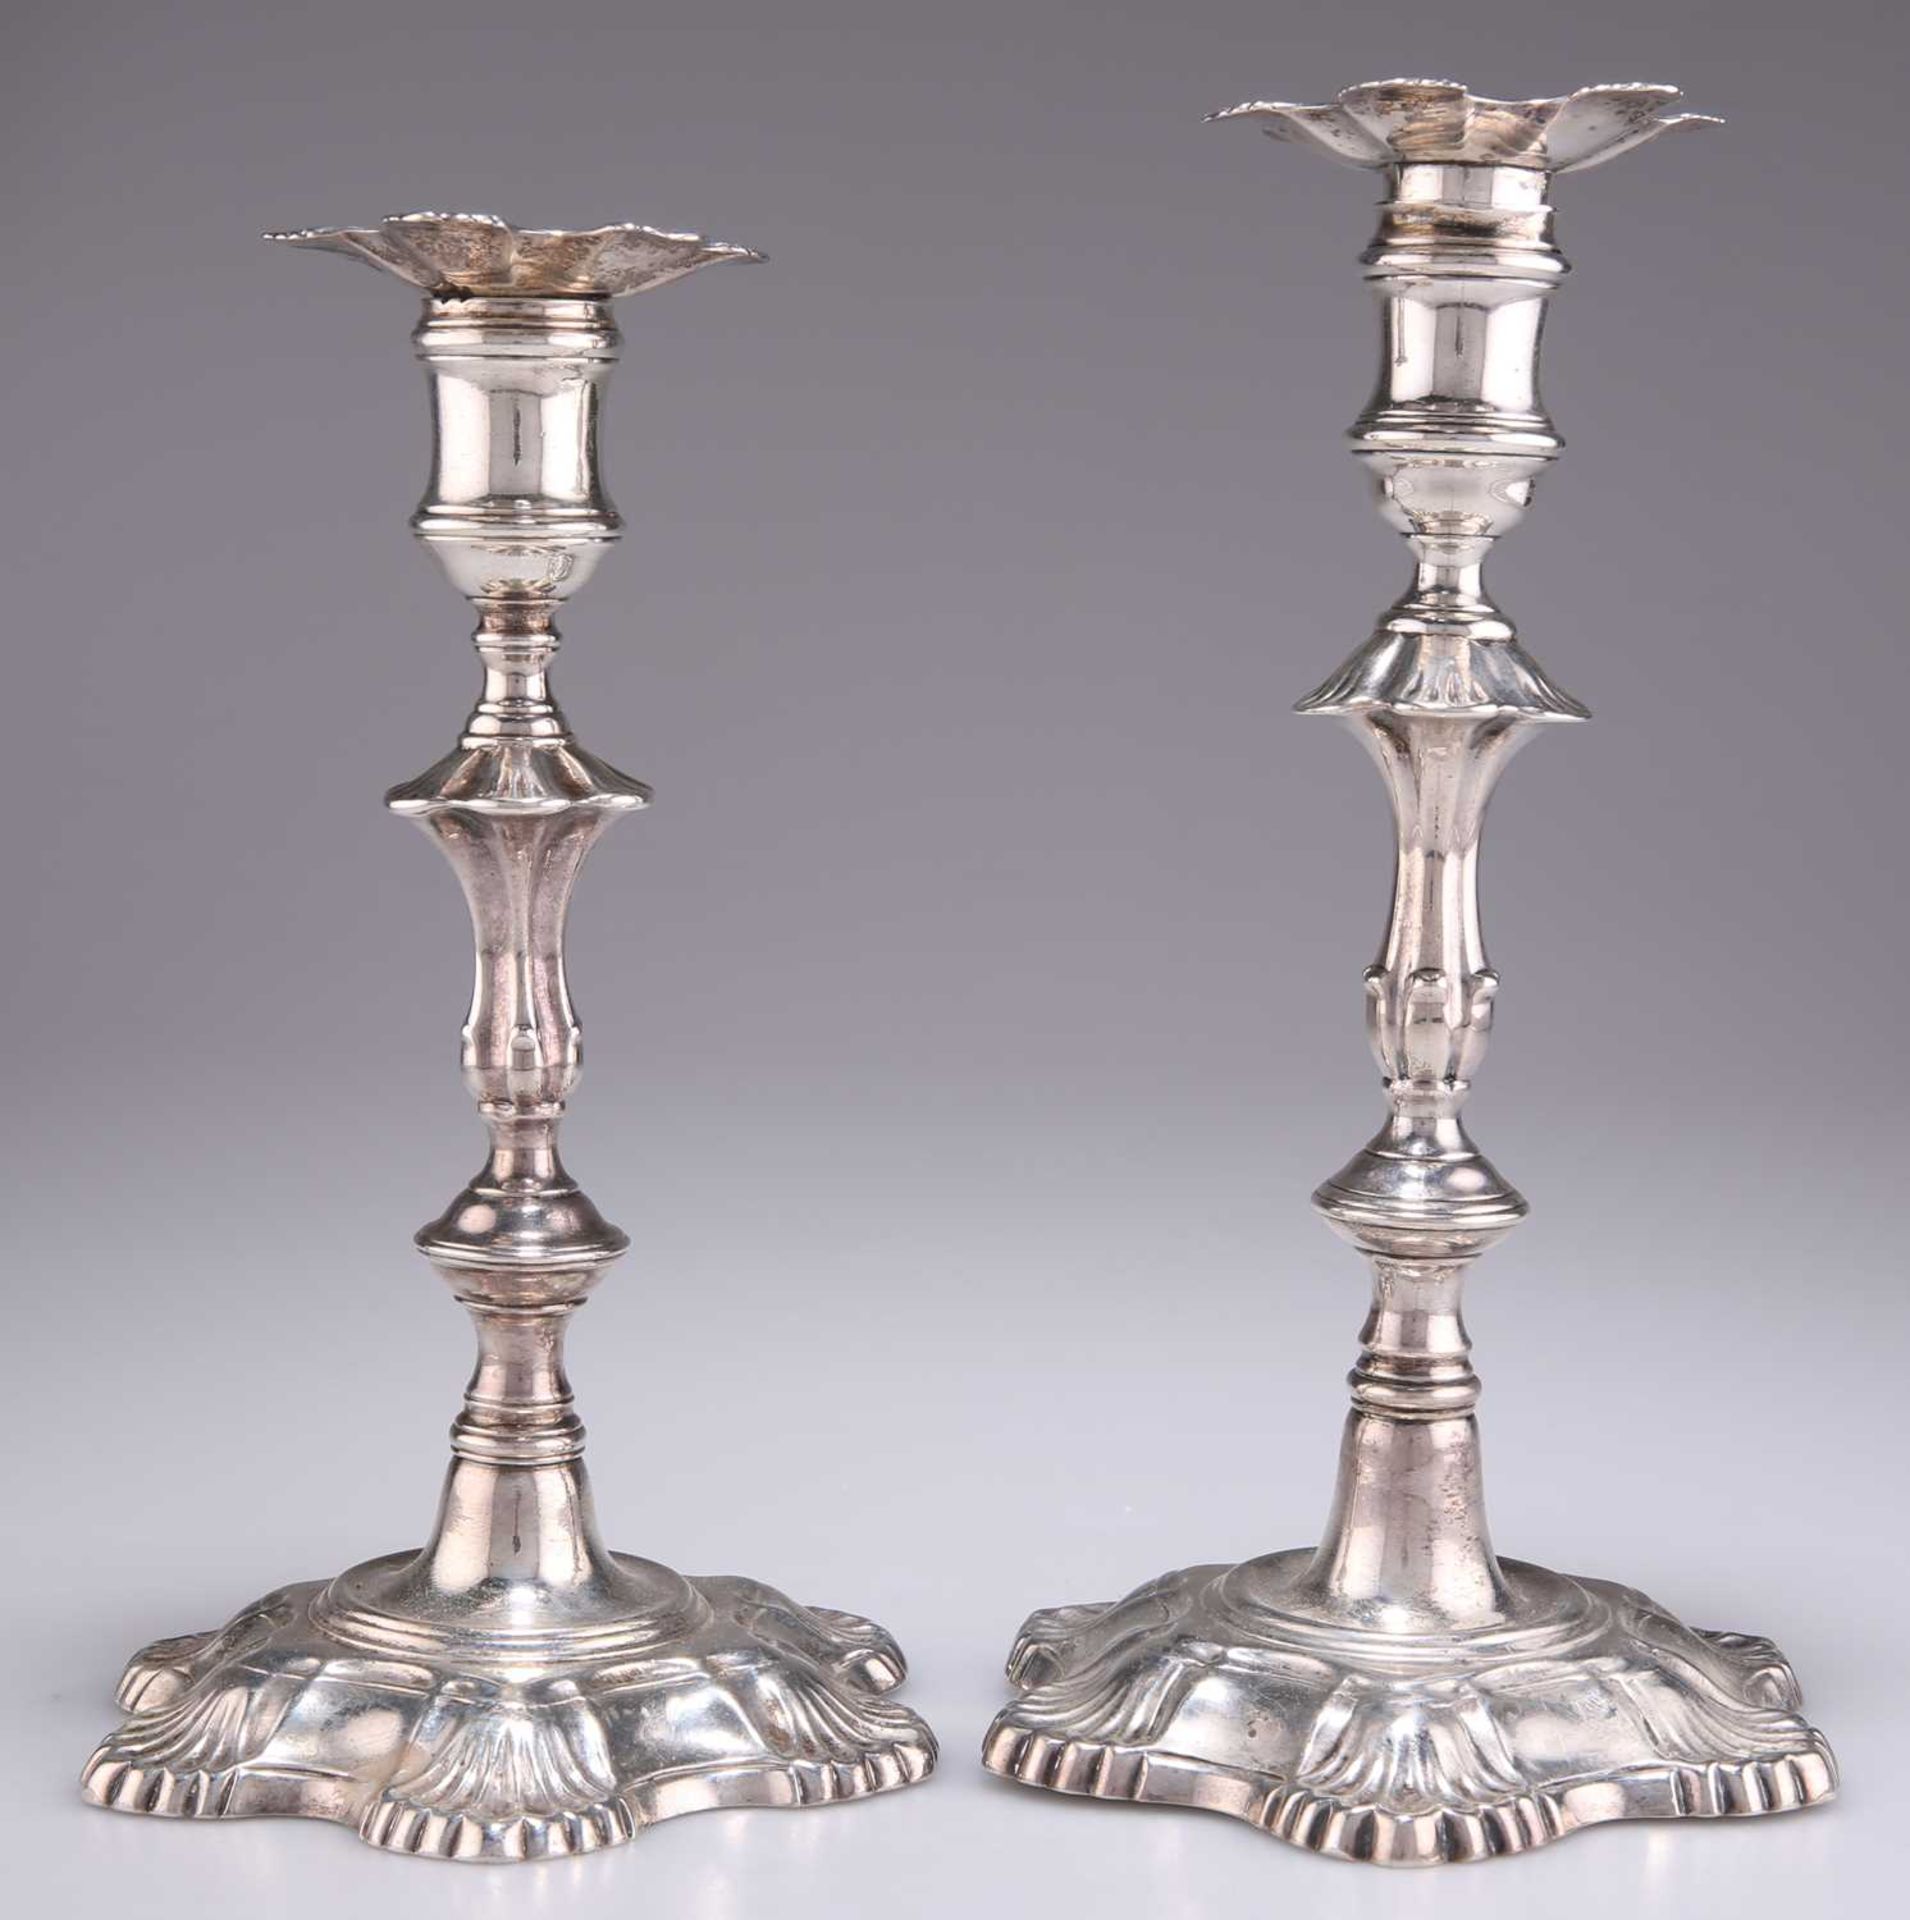 TWO 18TH CENTURY CAST SILVER CANDLESTICKS